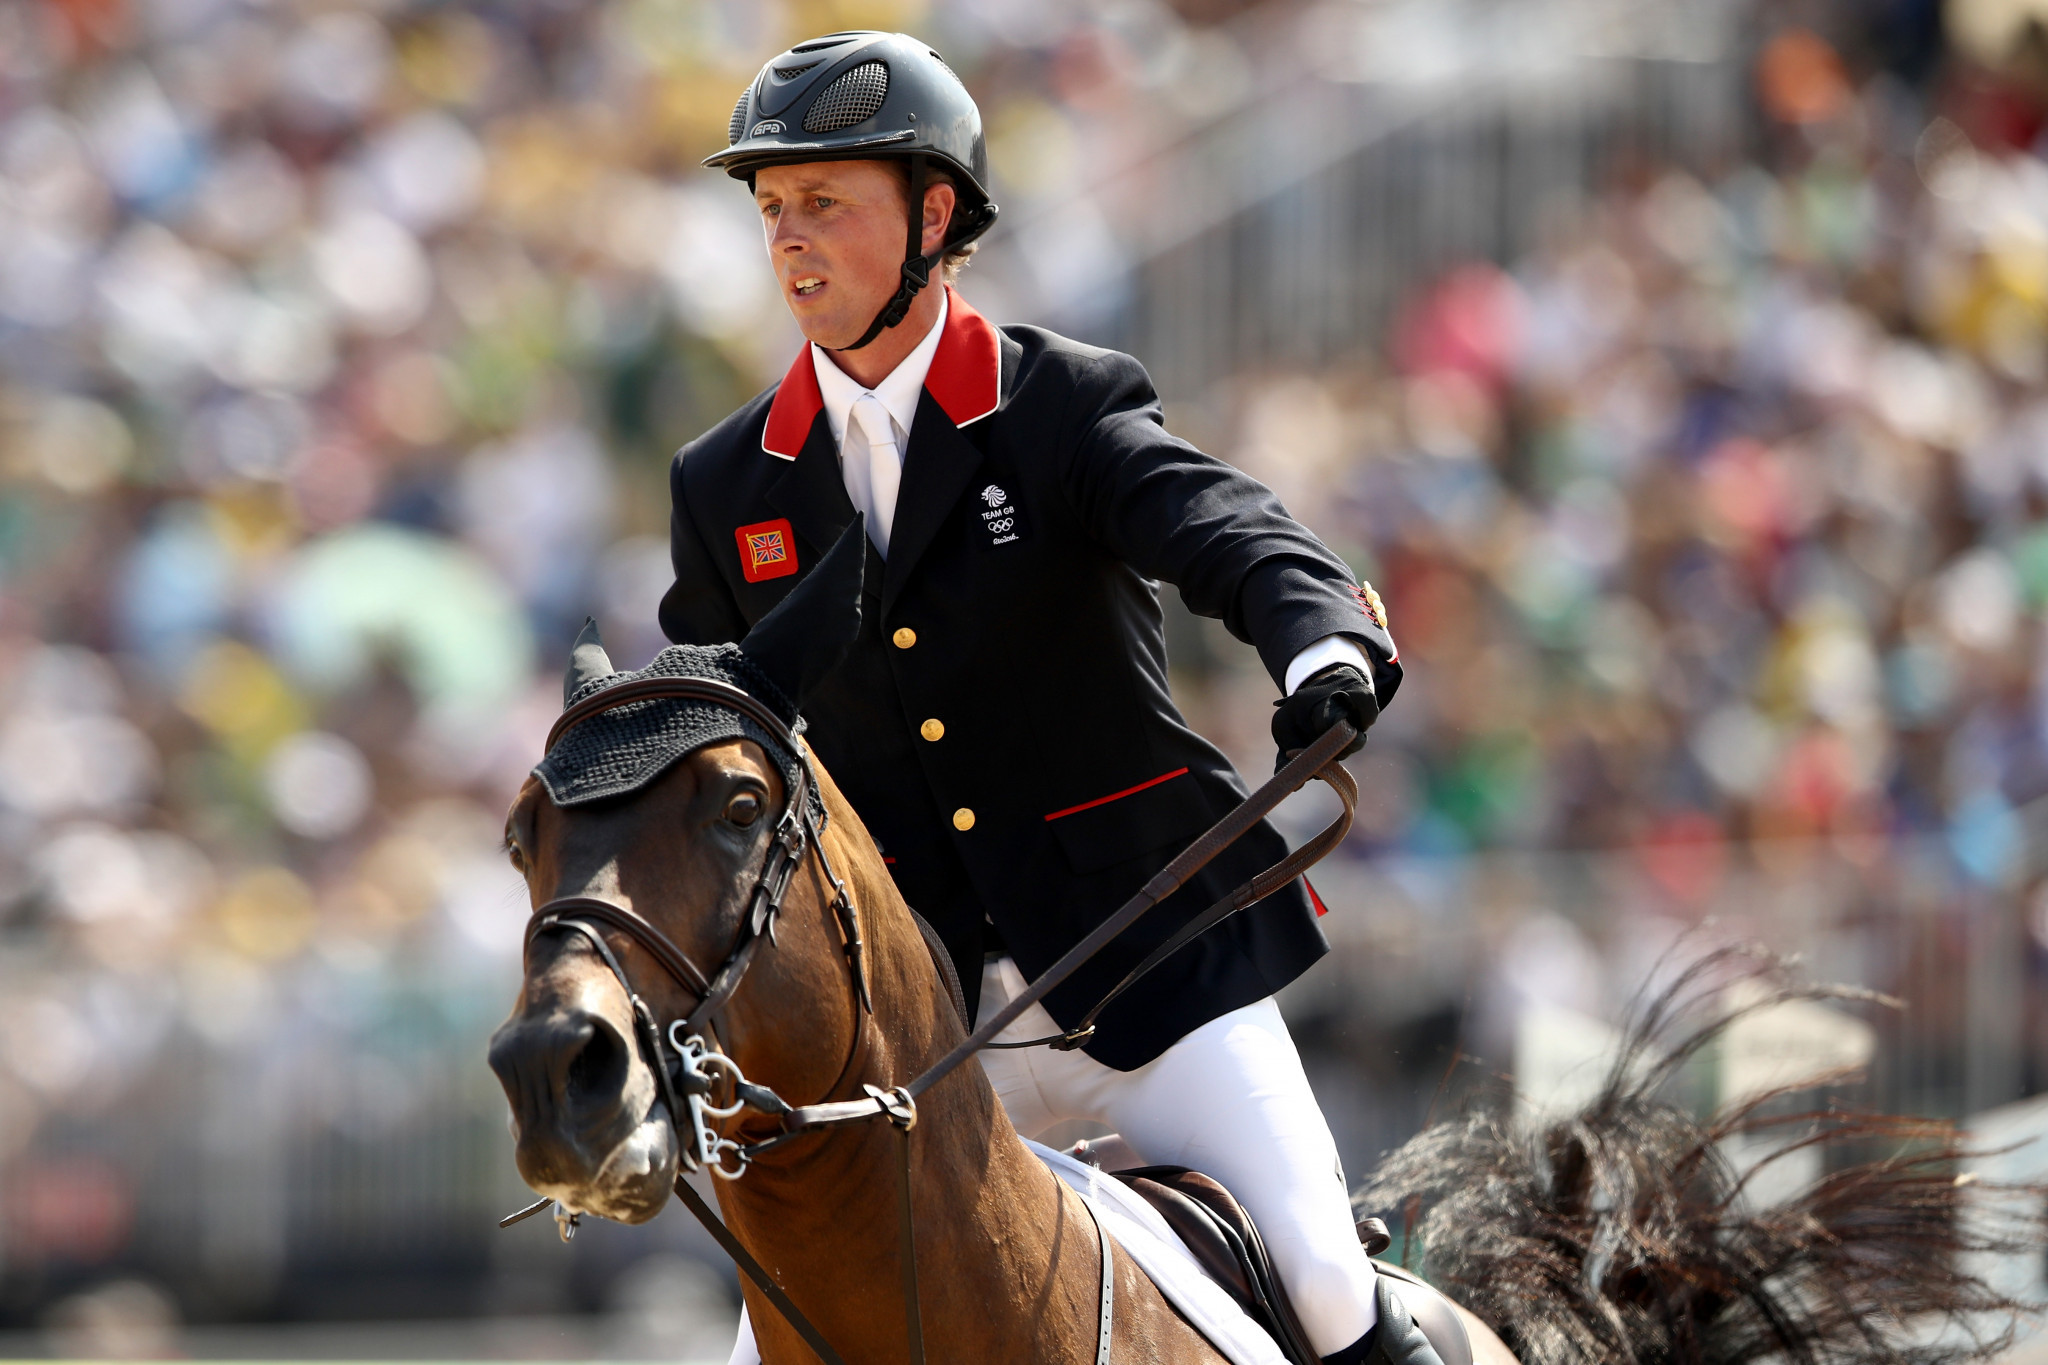 Britain's Ben Maher currently leads the standings and will be out to extend his advantage in Berlin ©Getty Images